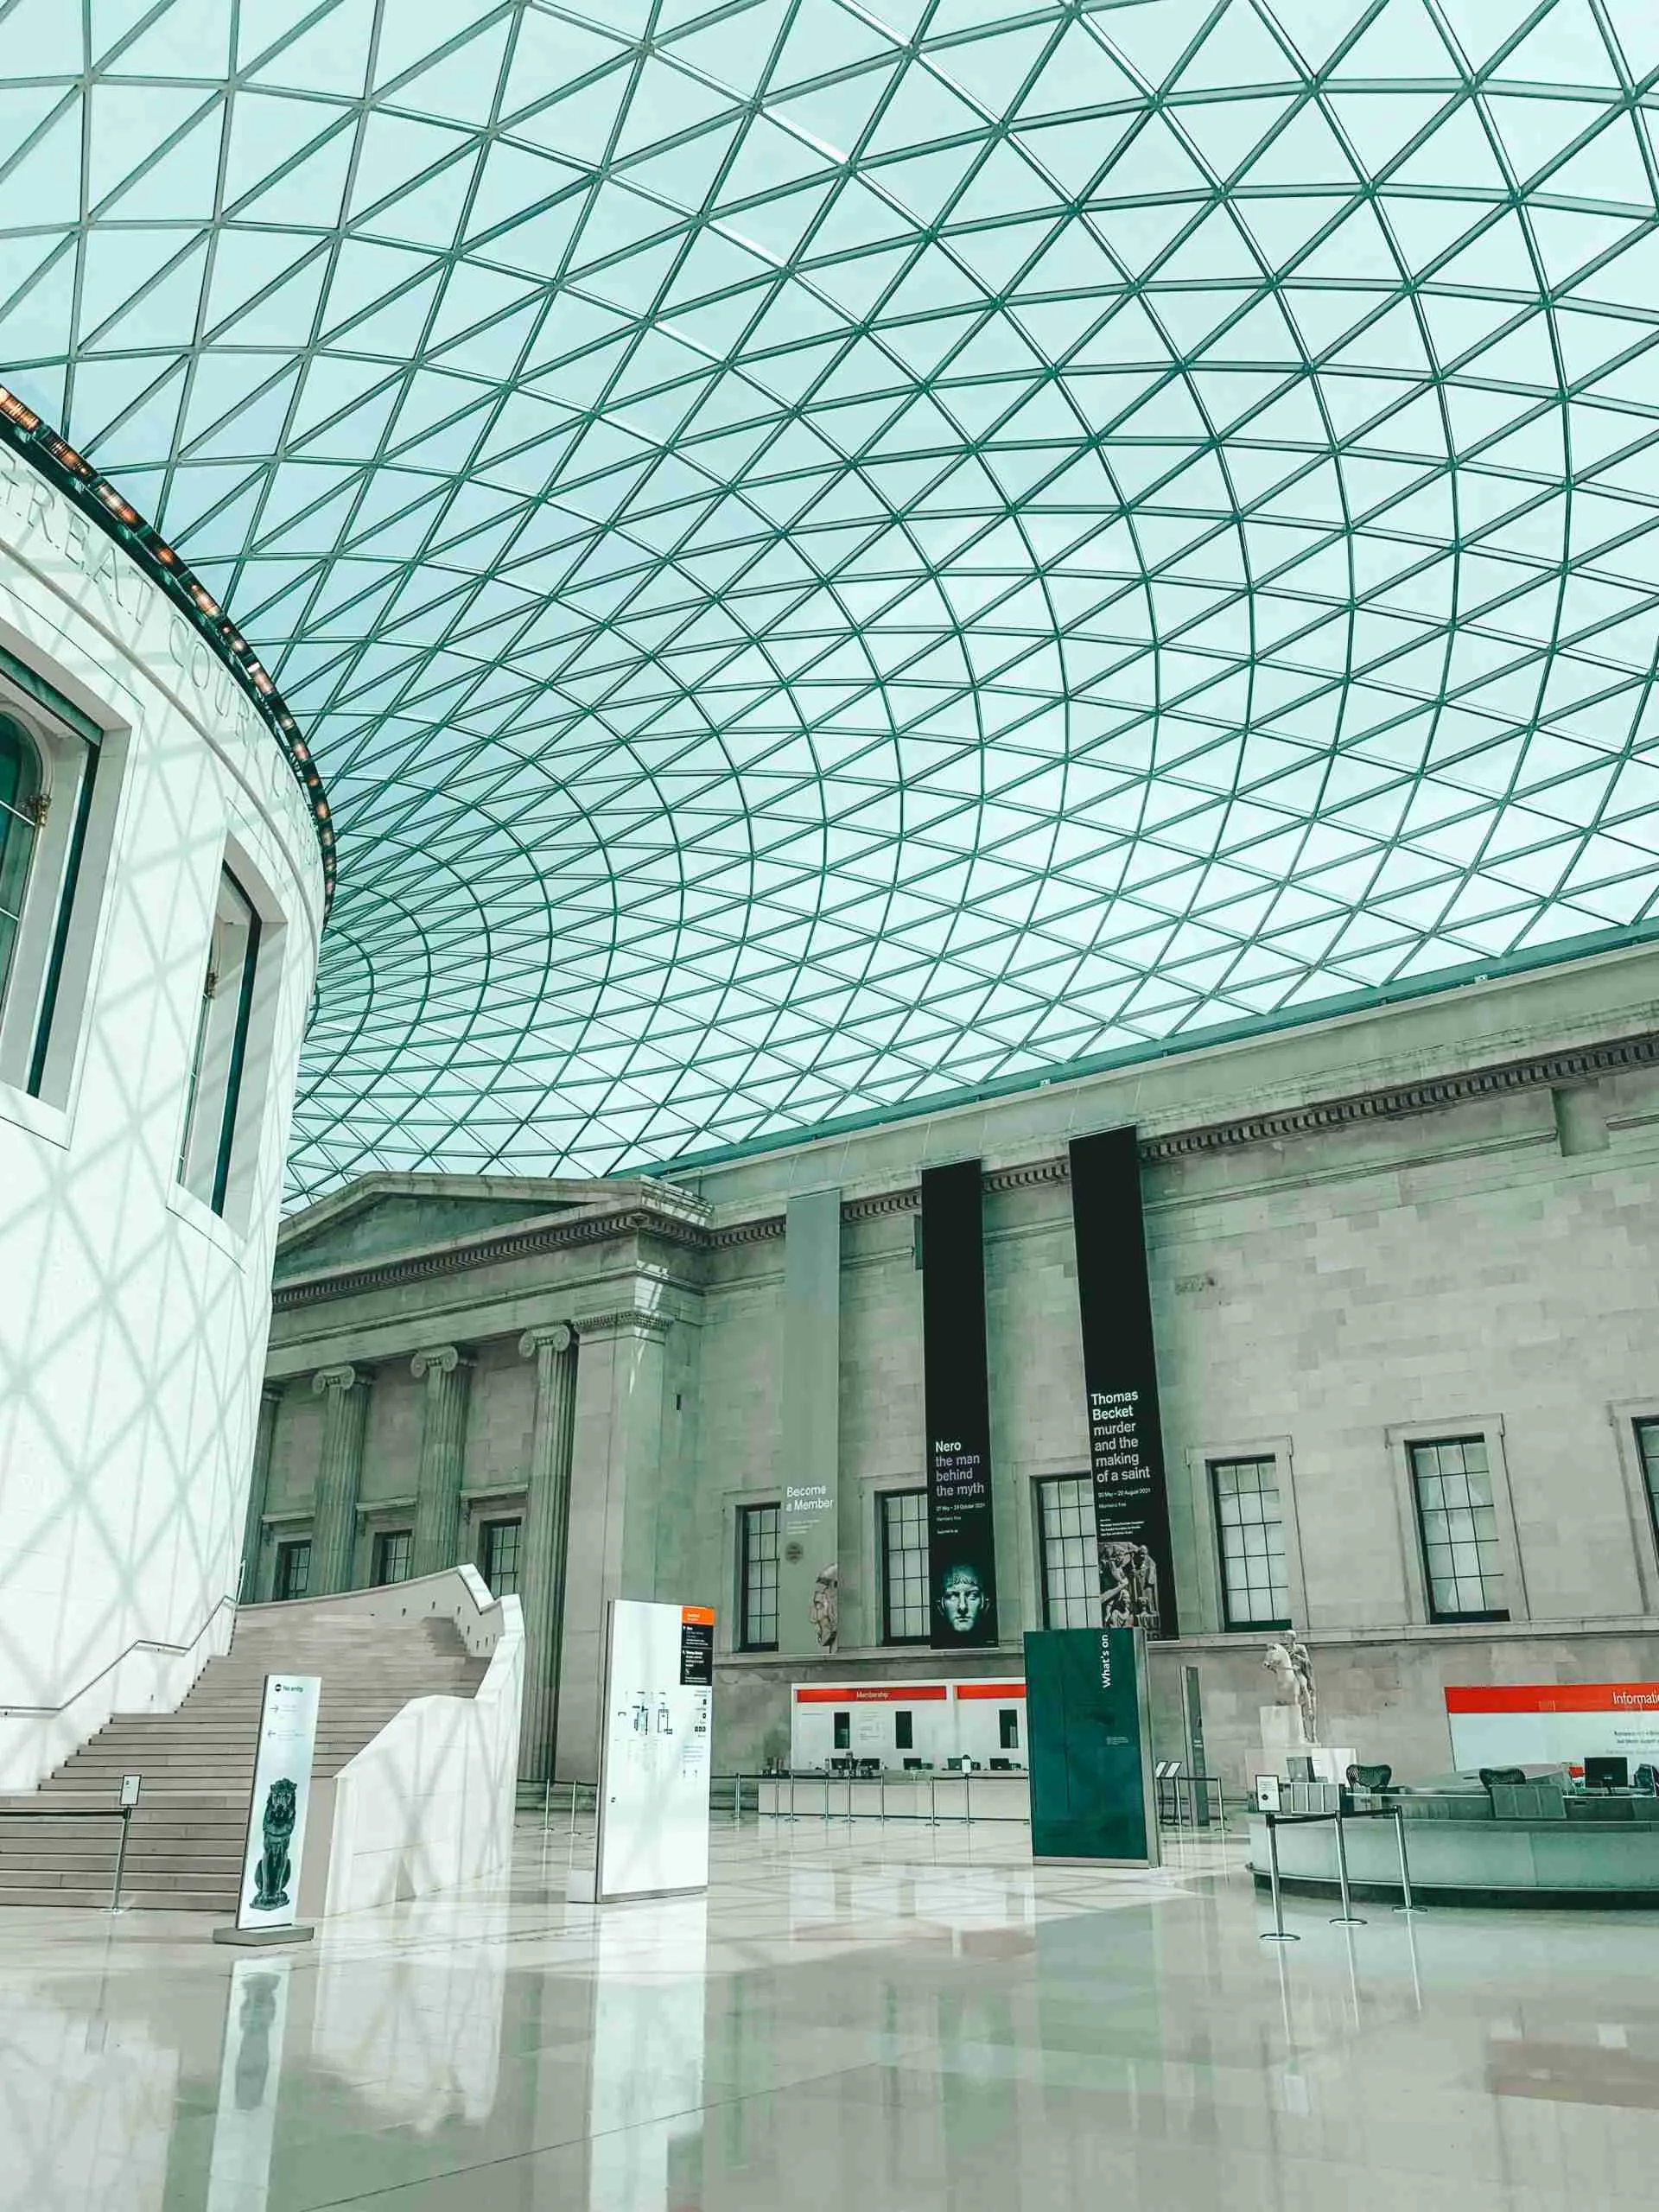 The main atrium of the British Museum , one of the most famous of London's museums